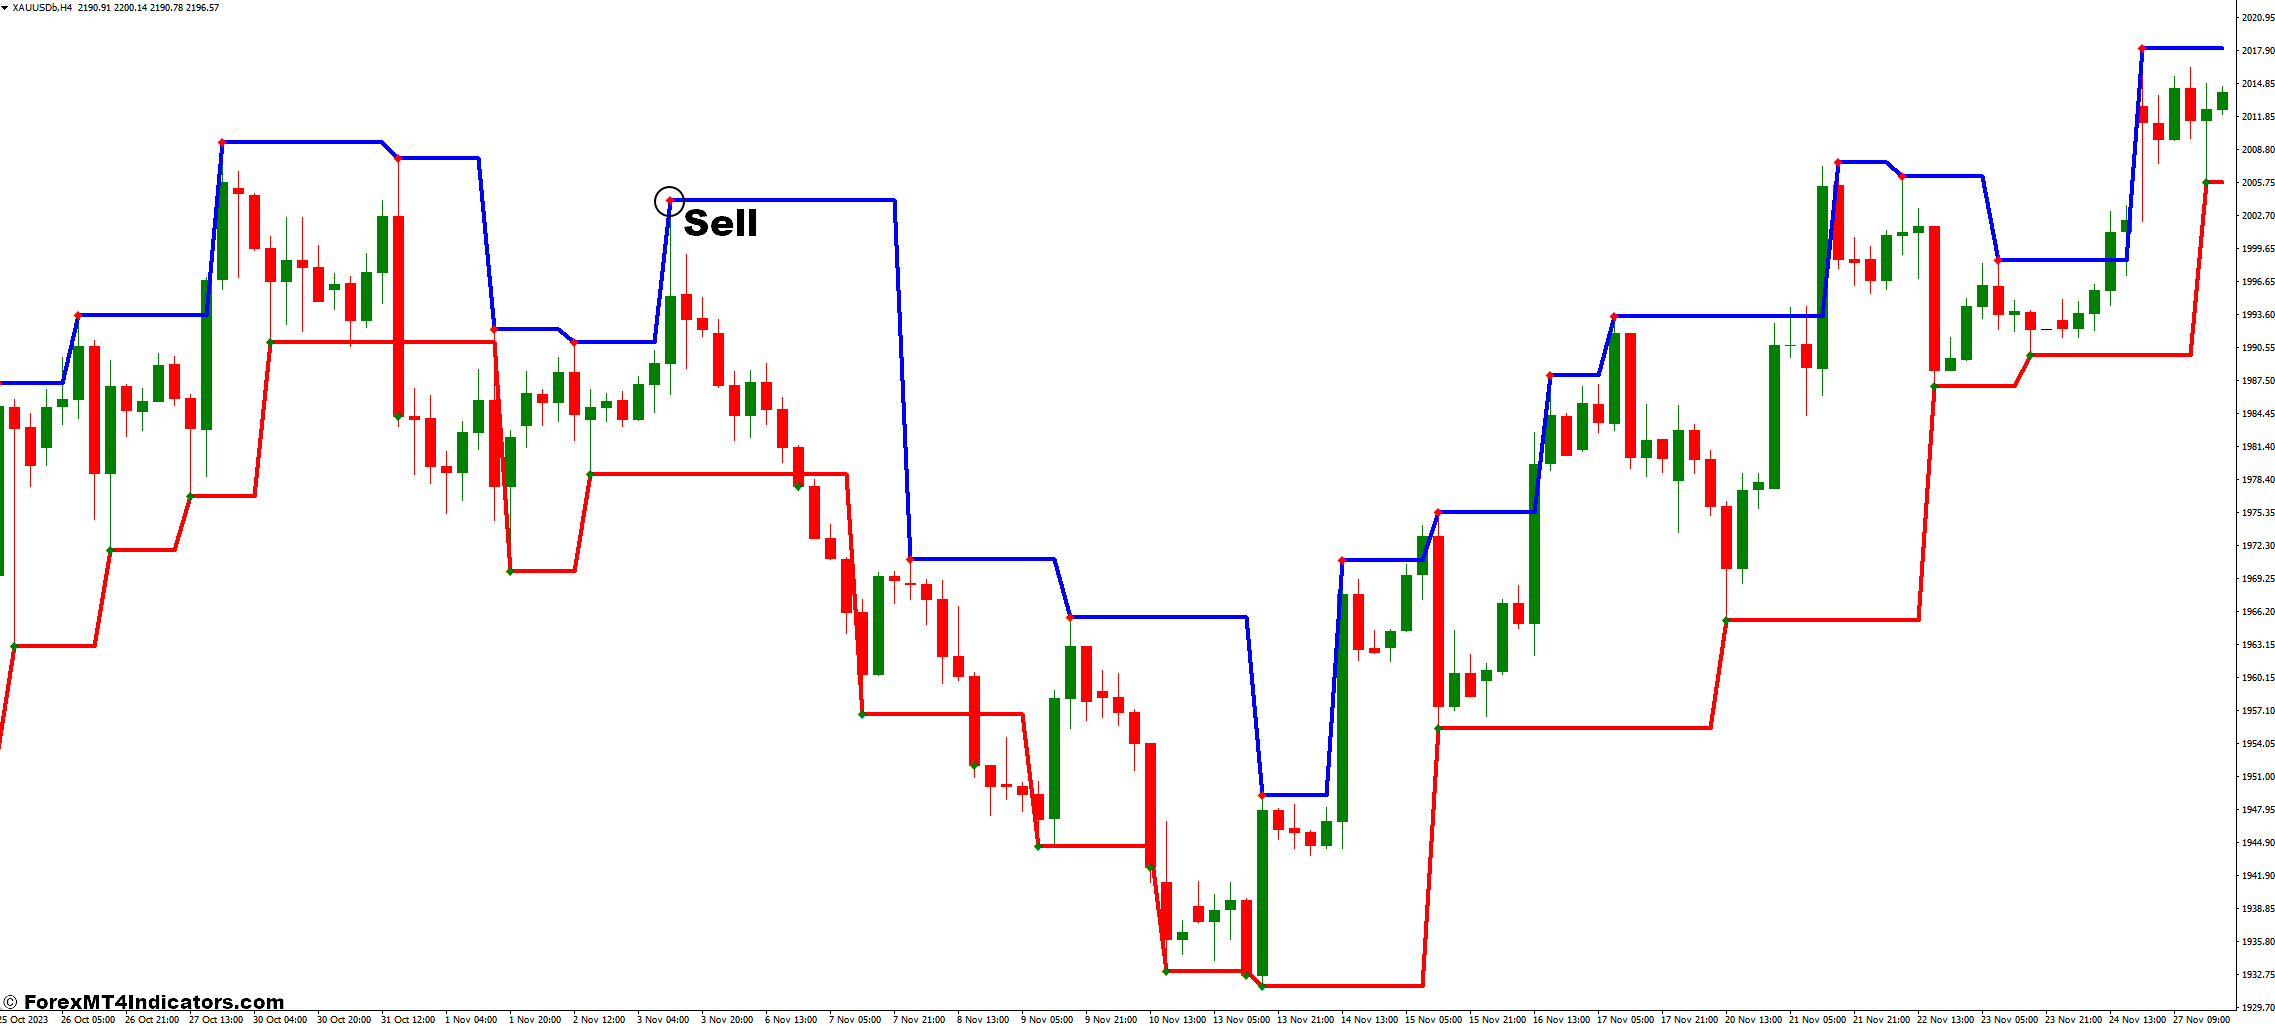 How to Trade with Fractal Levels Indicator - Sell Entry